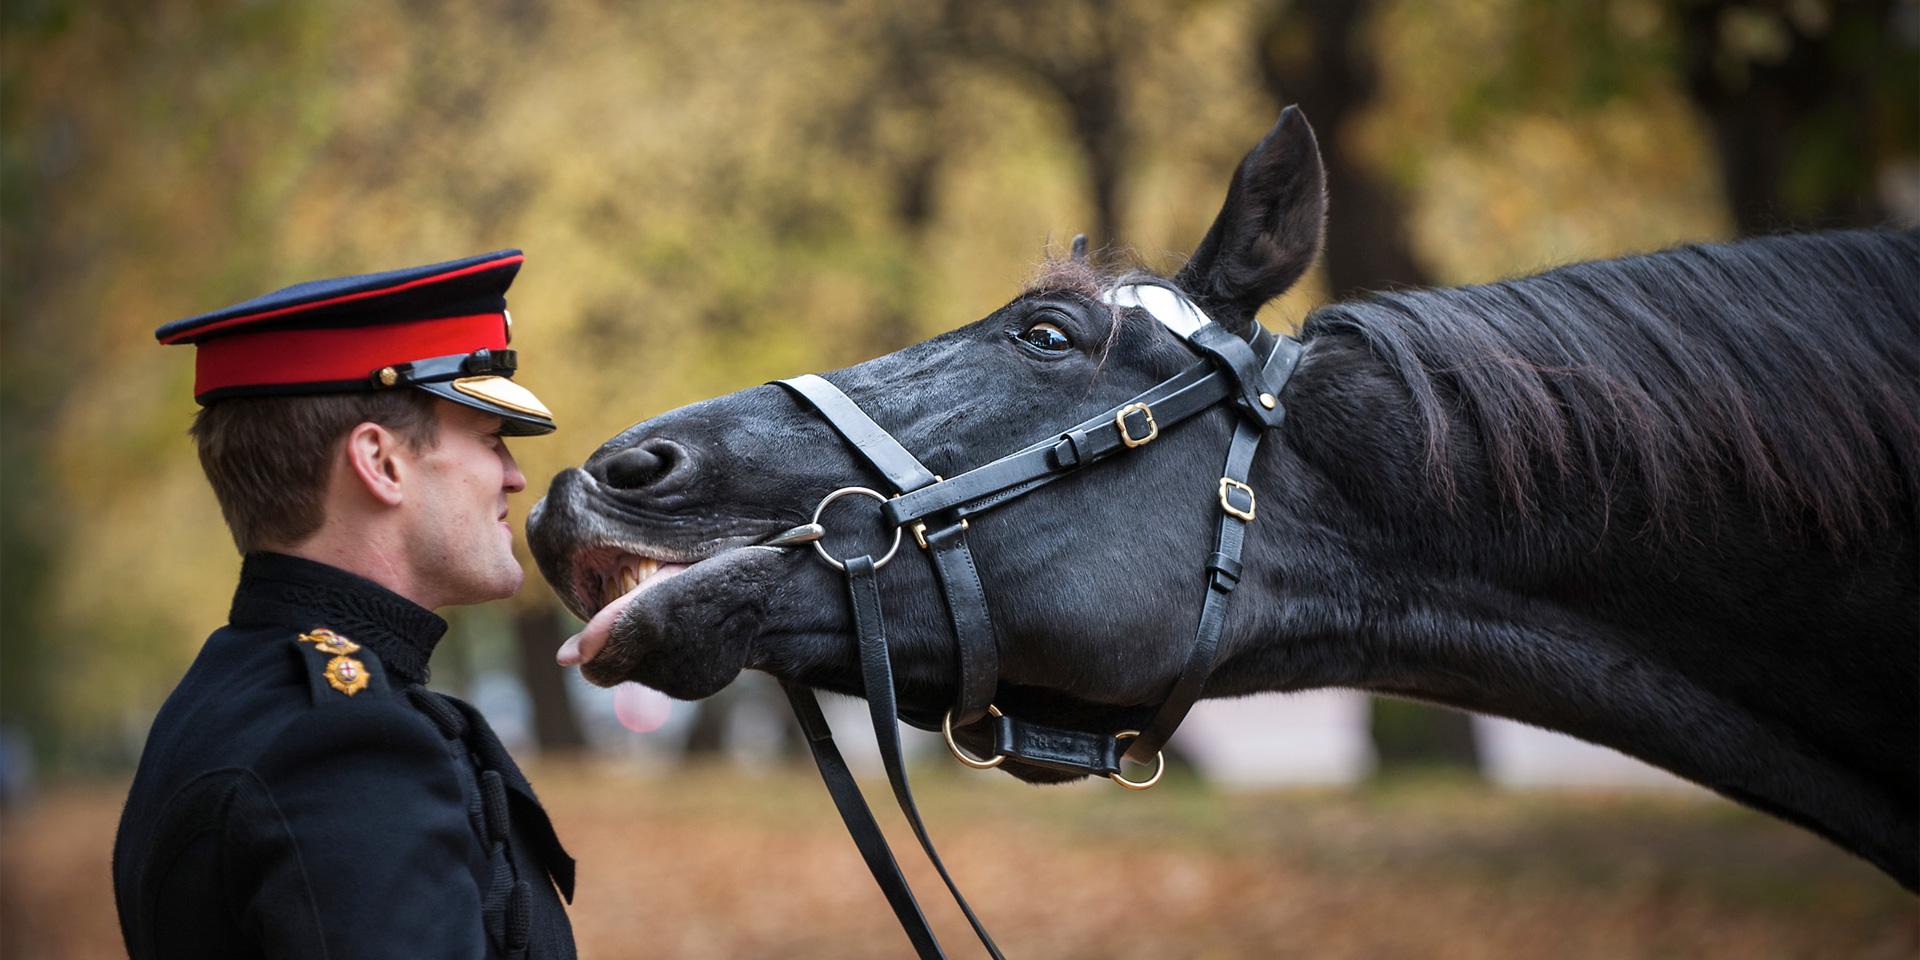 A Loving Home For Retiring Military Veteran Horses After They Have Served